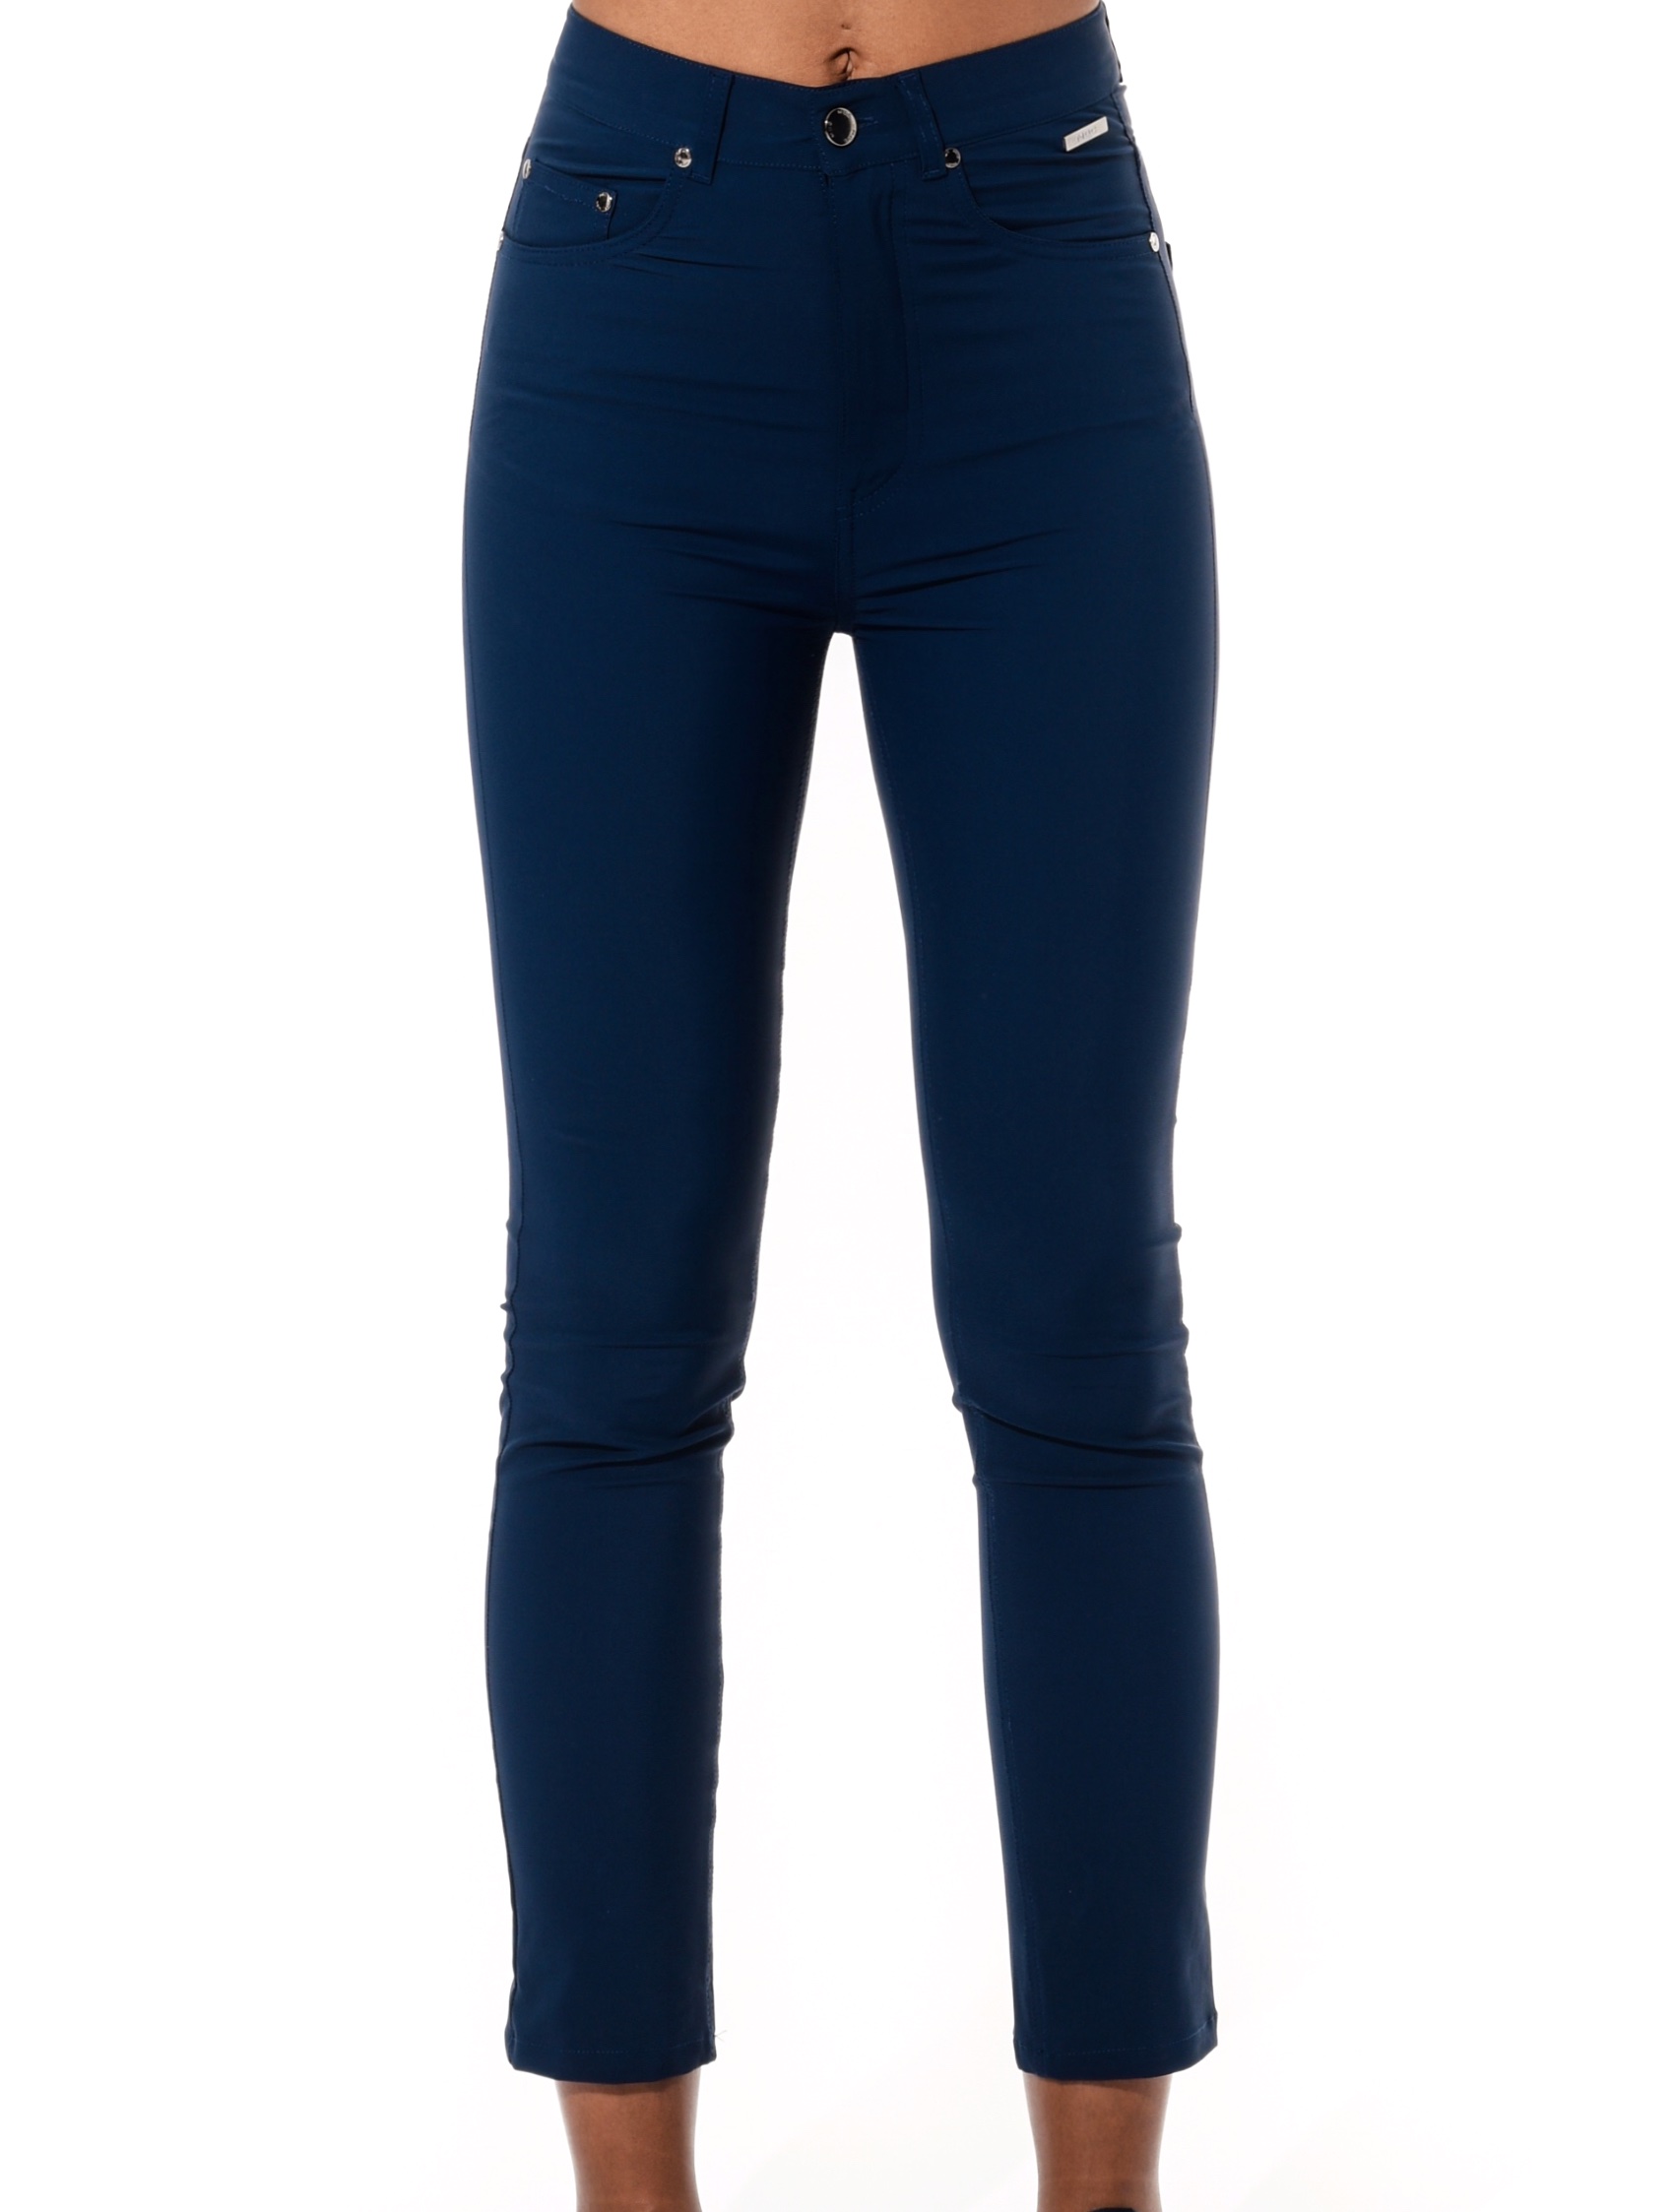 4way stretch high waist ankle pants navy 